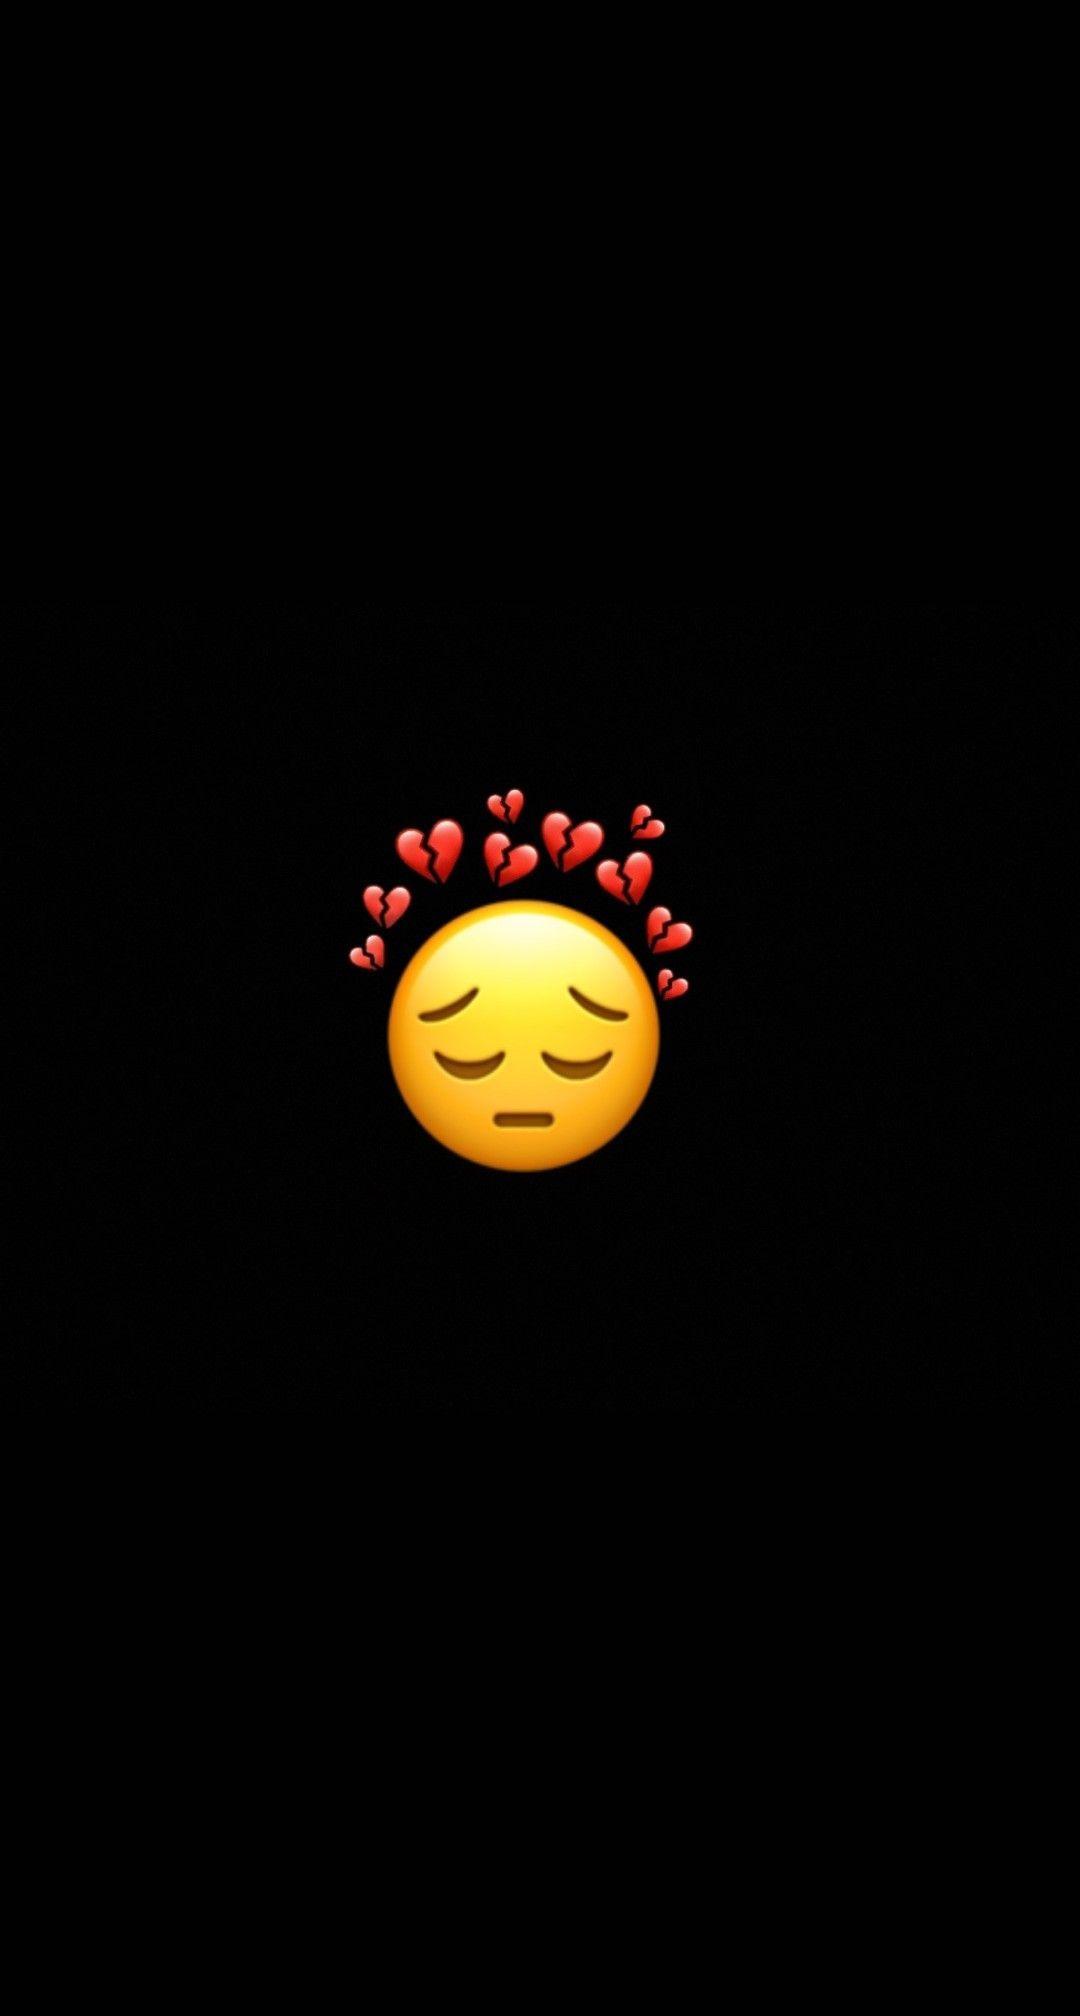 Featured image of post Whatsapp Status Sad Emoji - This sad face emoji with a frowning mouth and disappointed … this sad face emoji with a frowning mouth and disappointed eyes convey a sense of sadness, remorse, regret, disappointment, or any similarly negative emotion.